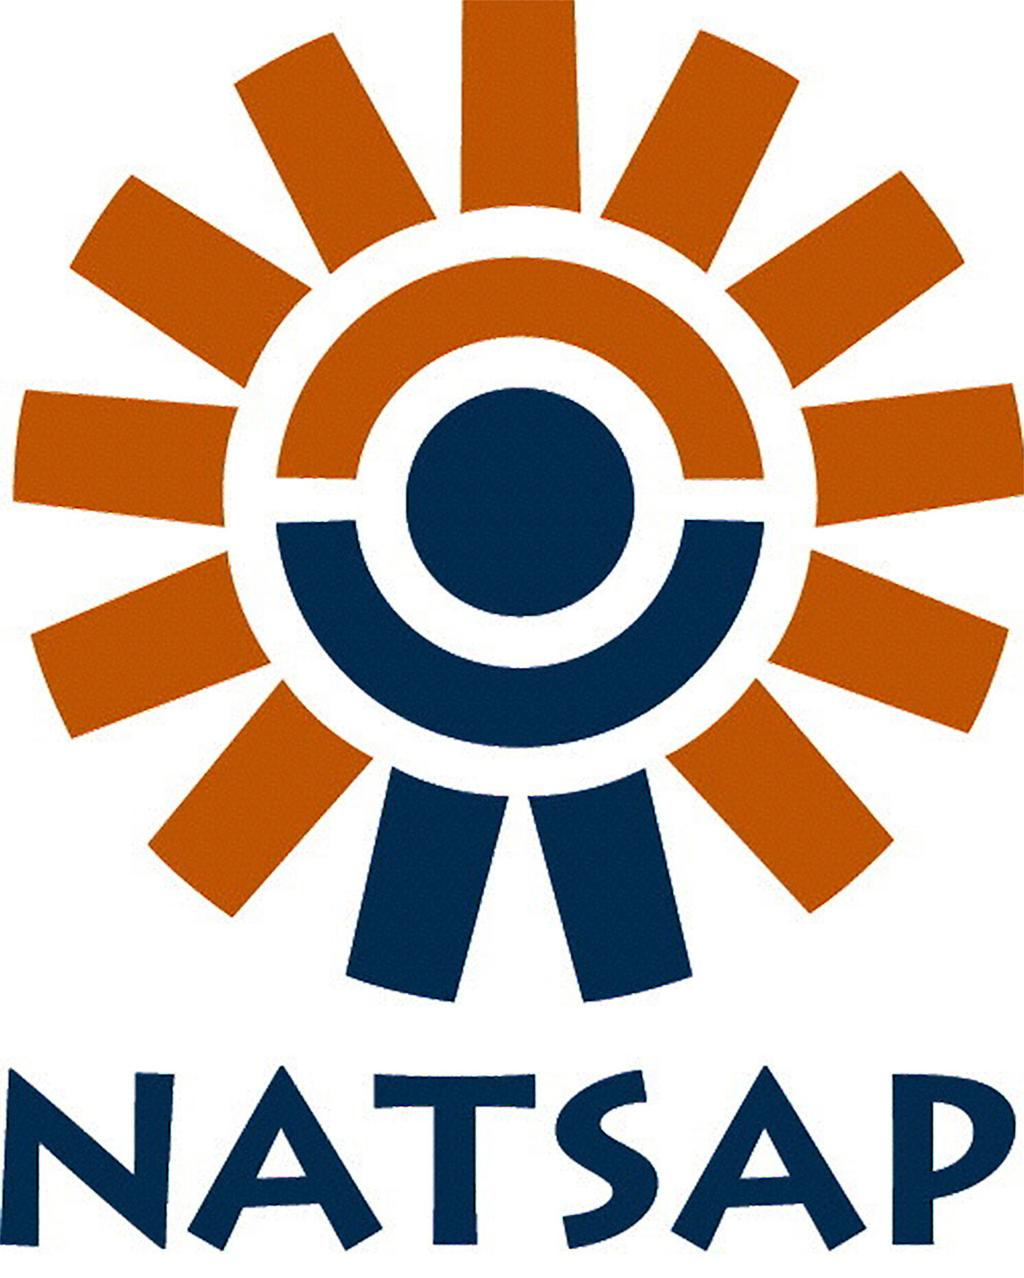 Affiliates Organizations that provide services and products expressly designed to supplement services rendered by regular NATSAP member programs.